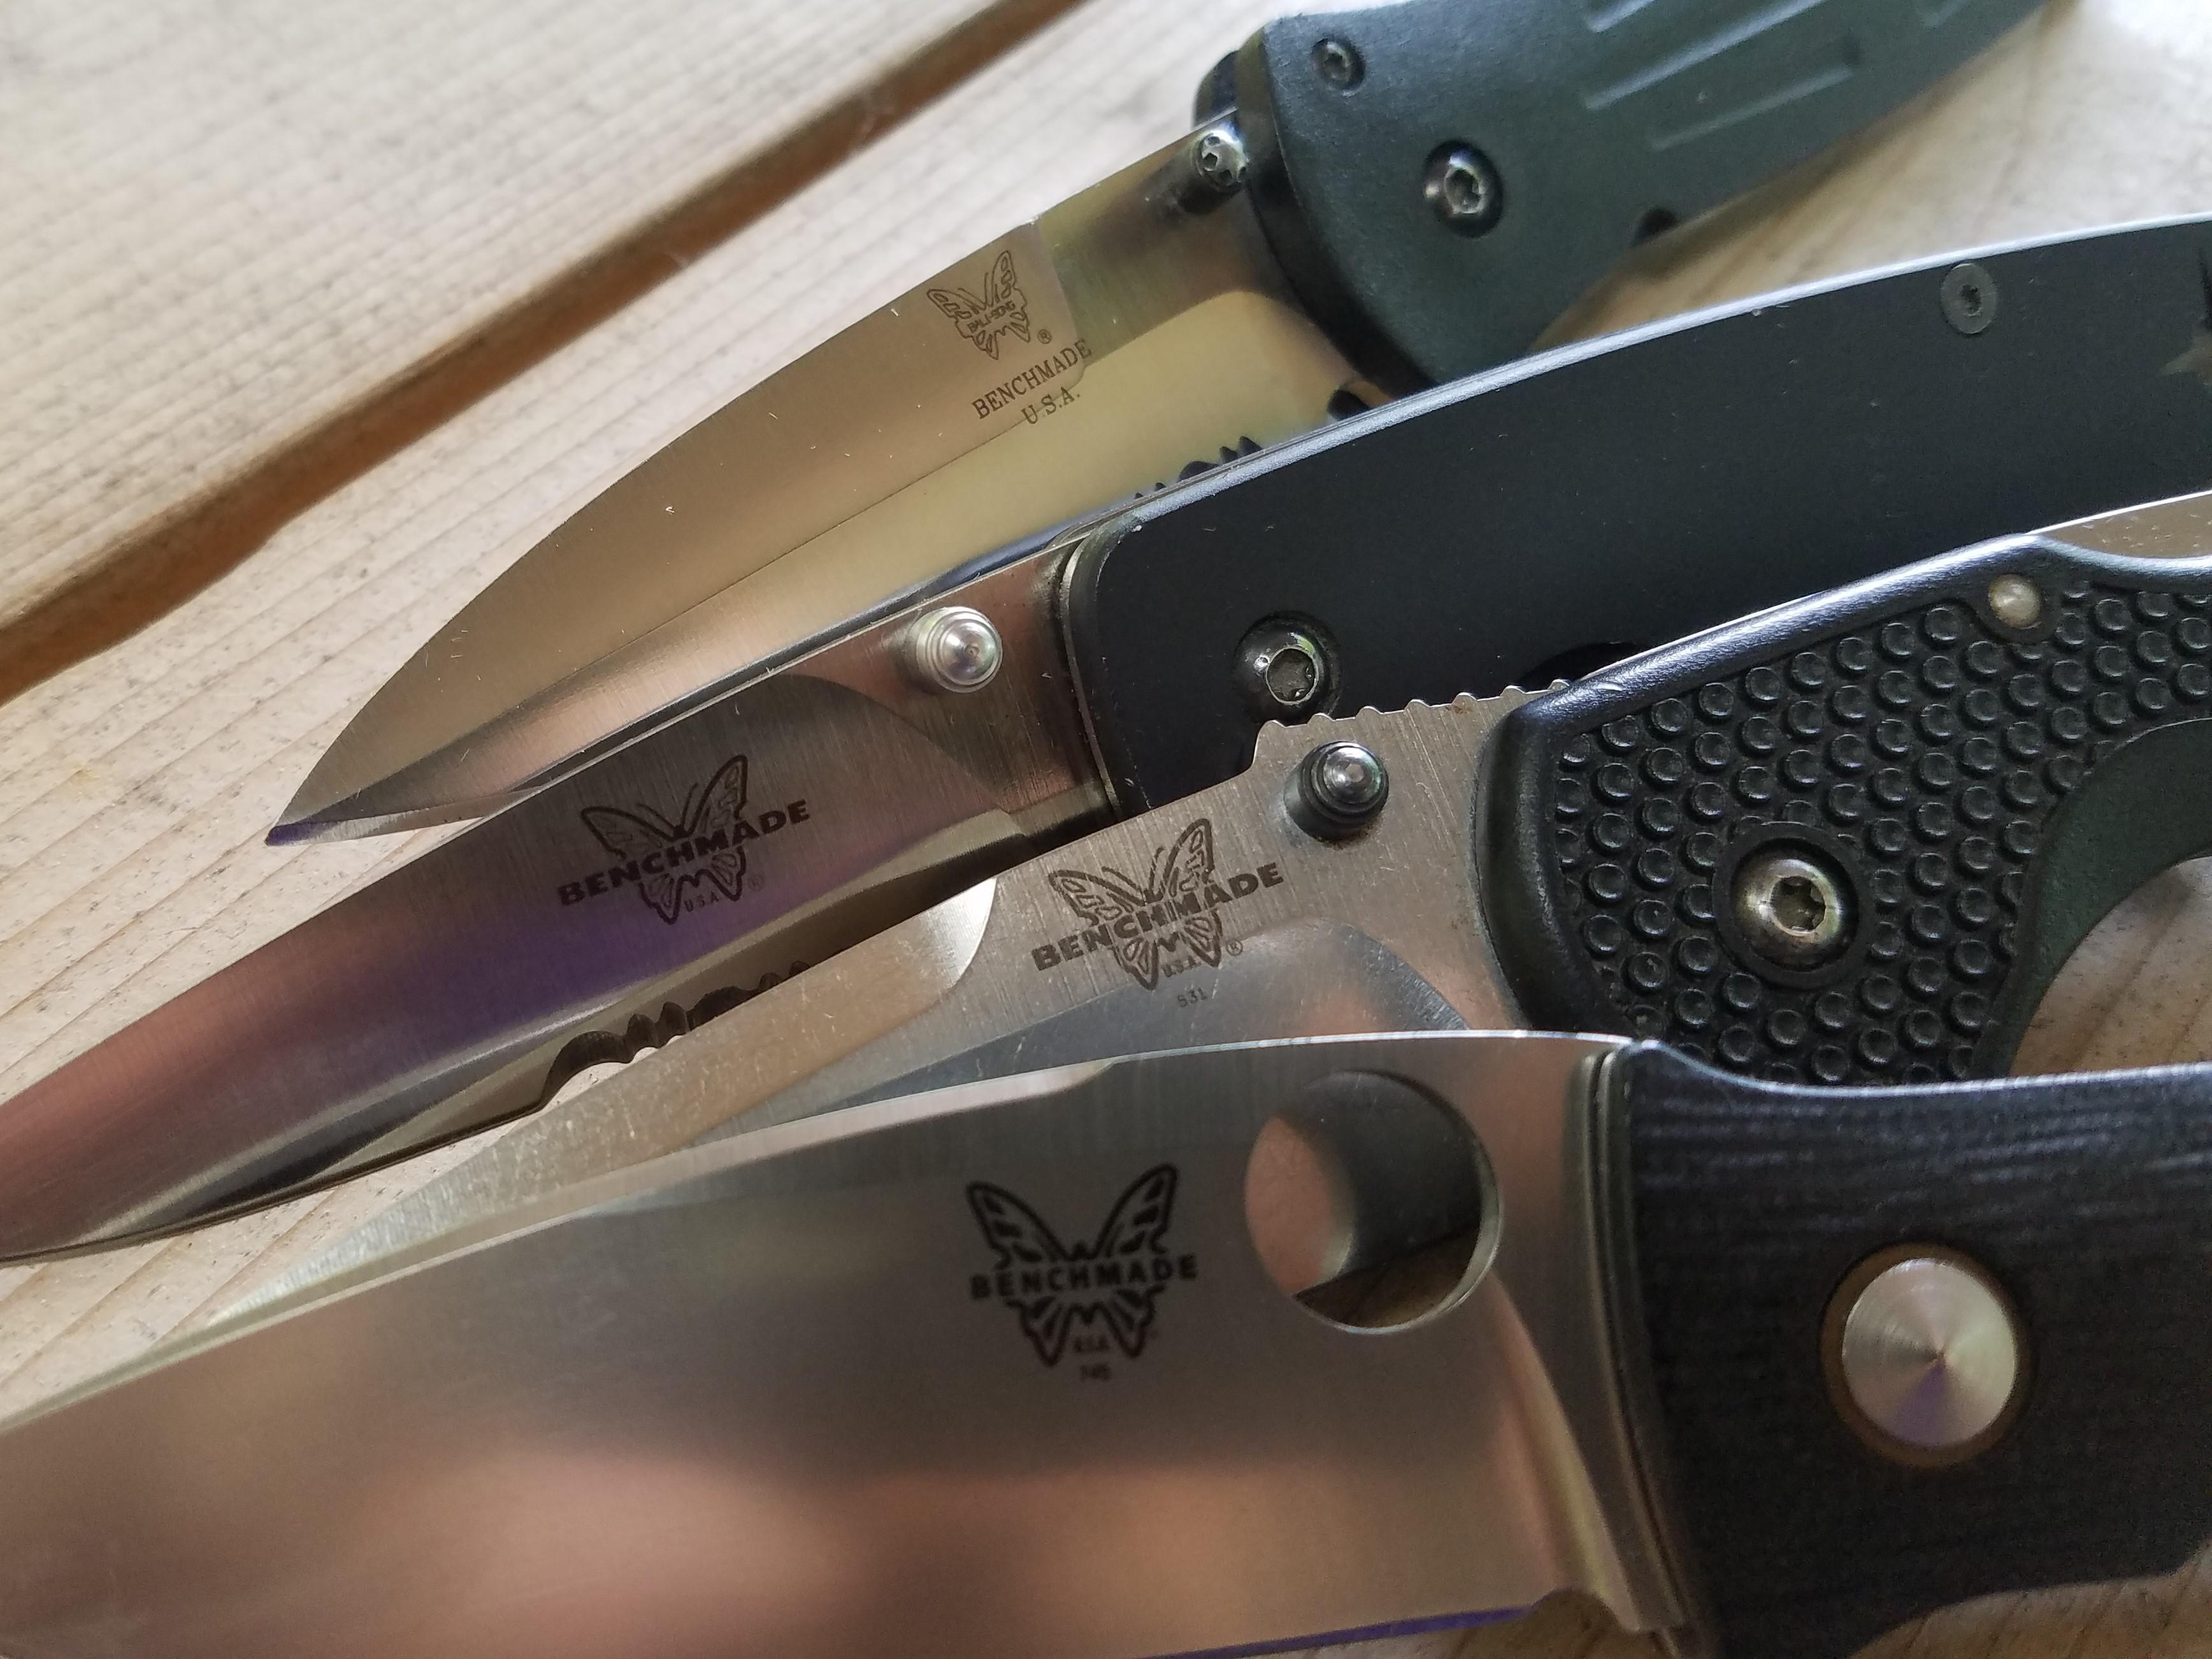 Benchmade Logo - Benchmade logo changes over time